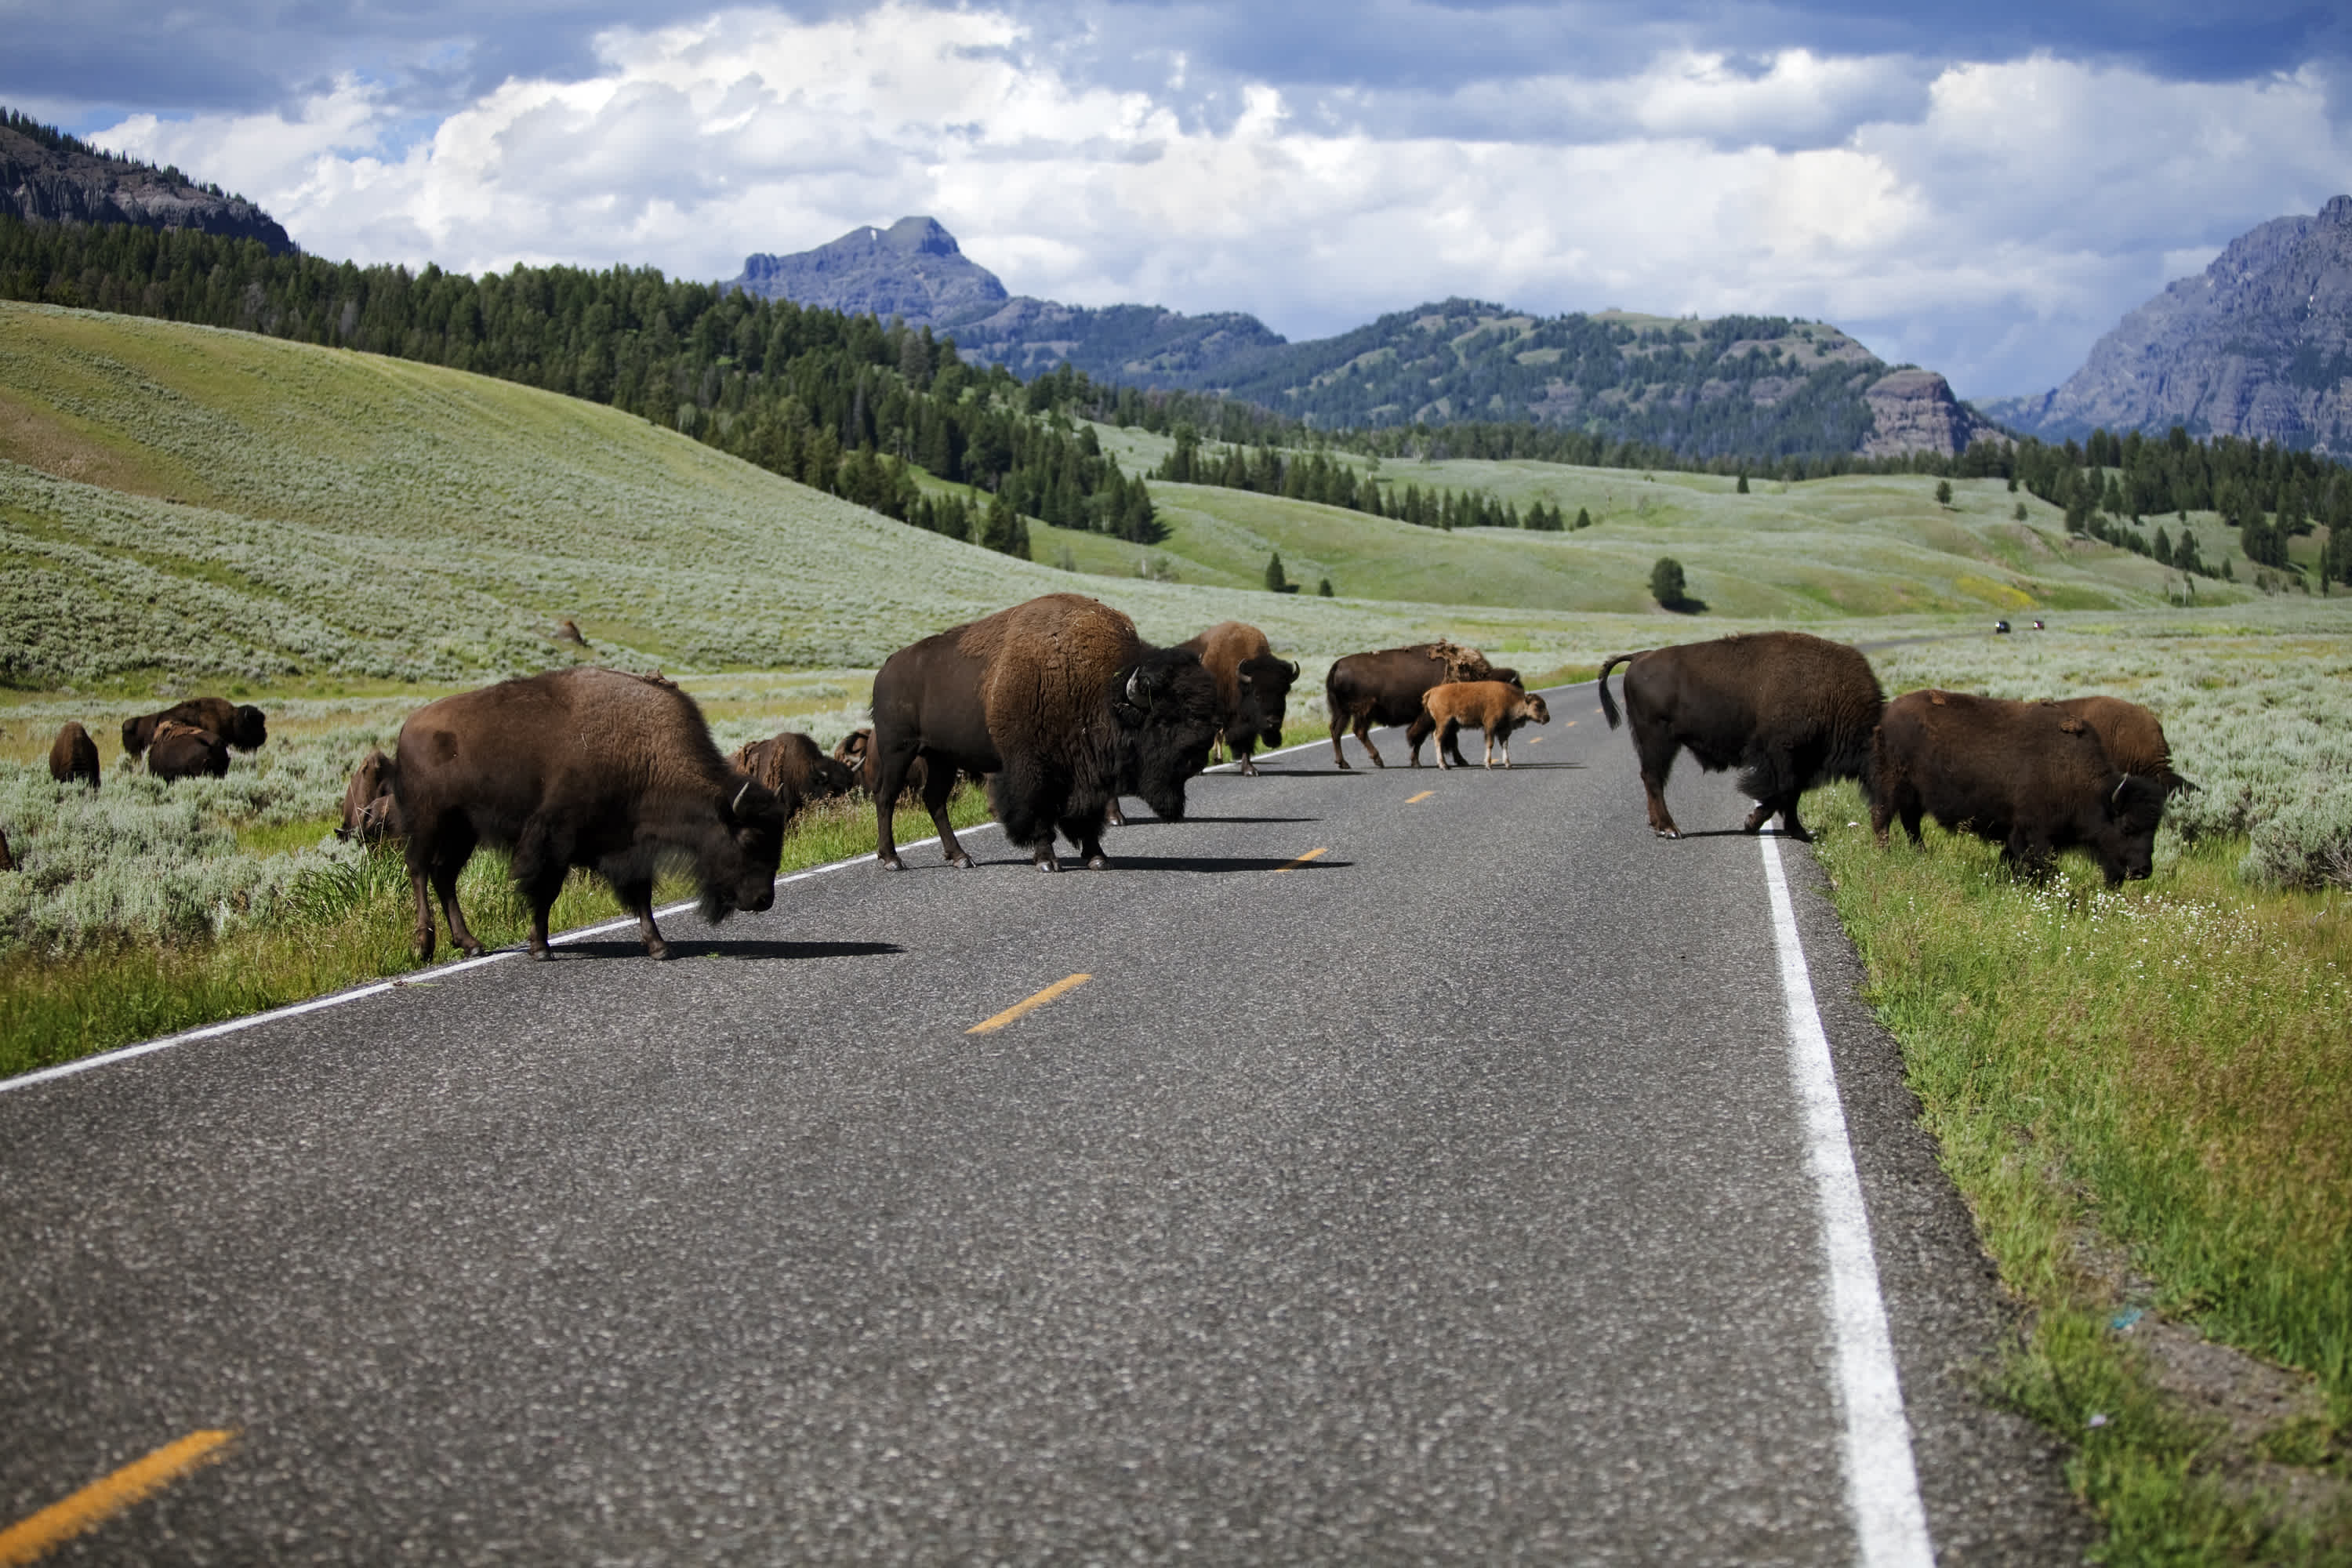 See wild bison during your Yellowstone Vacation, pictured here crossing the road, as part of a tour of North America.